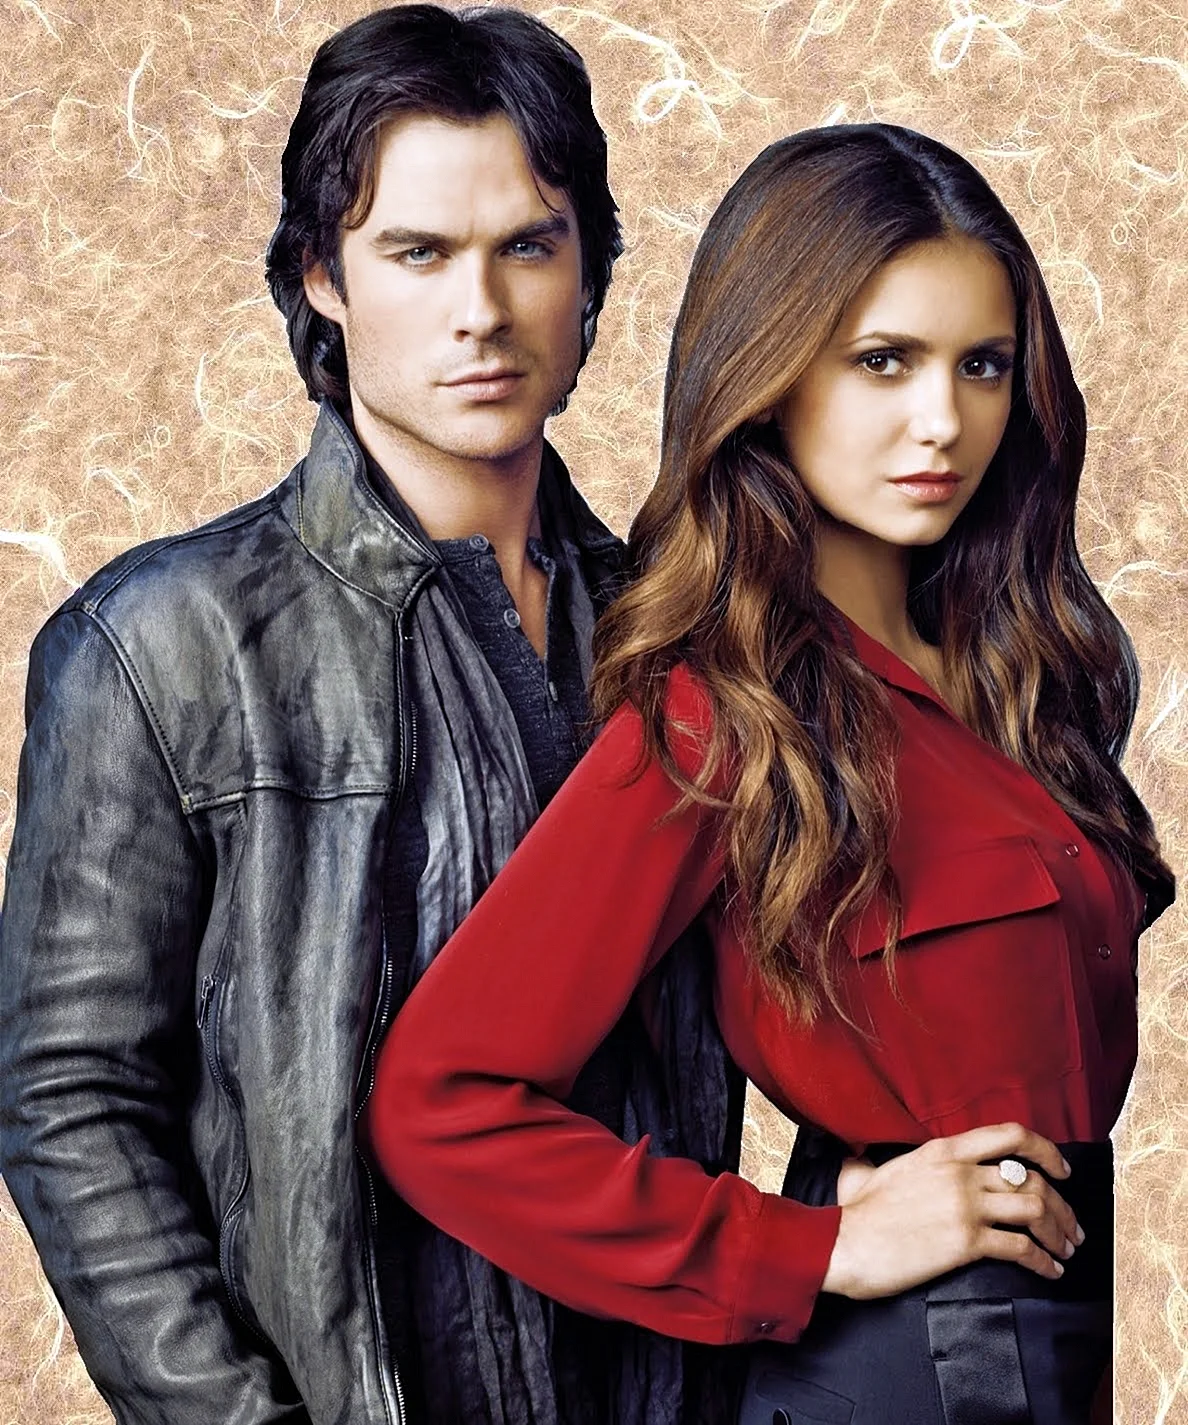 The Vampire Diaries Damon And Elena Wallpaper For iPhone